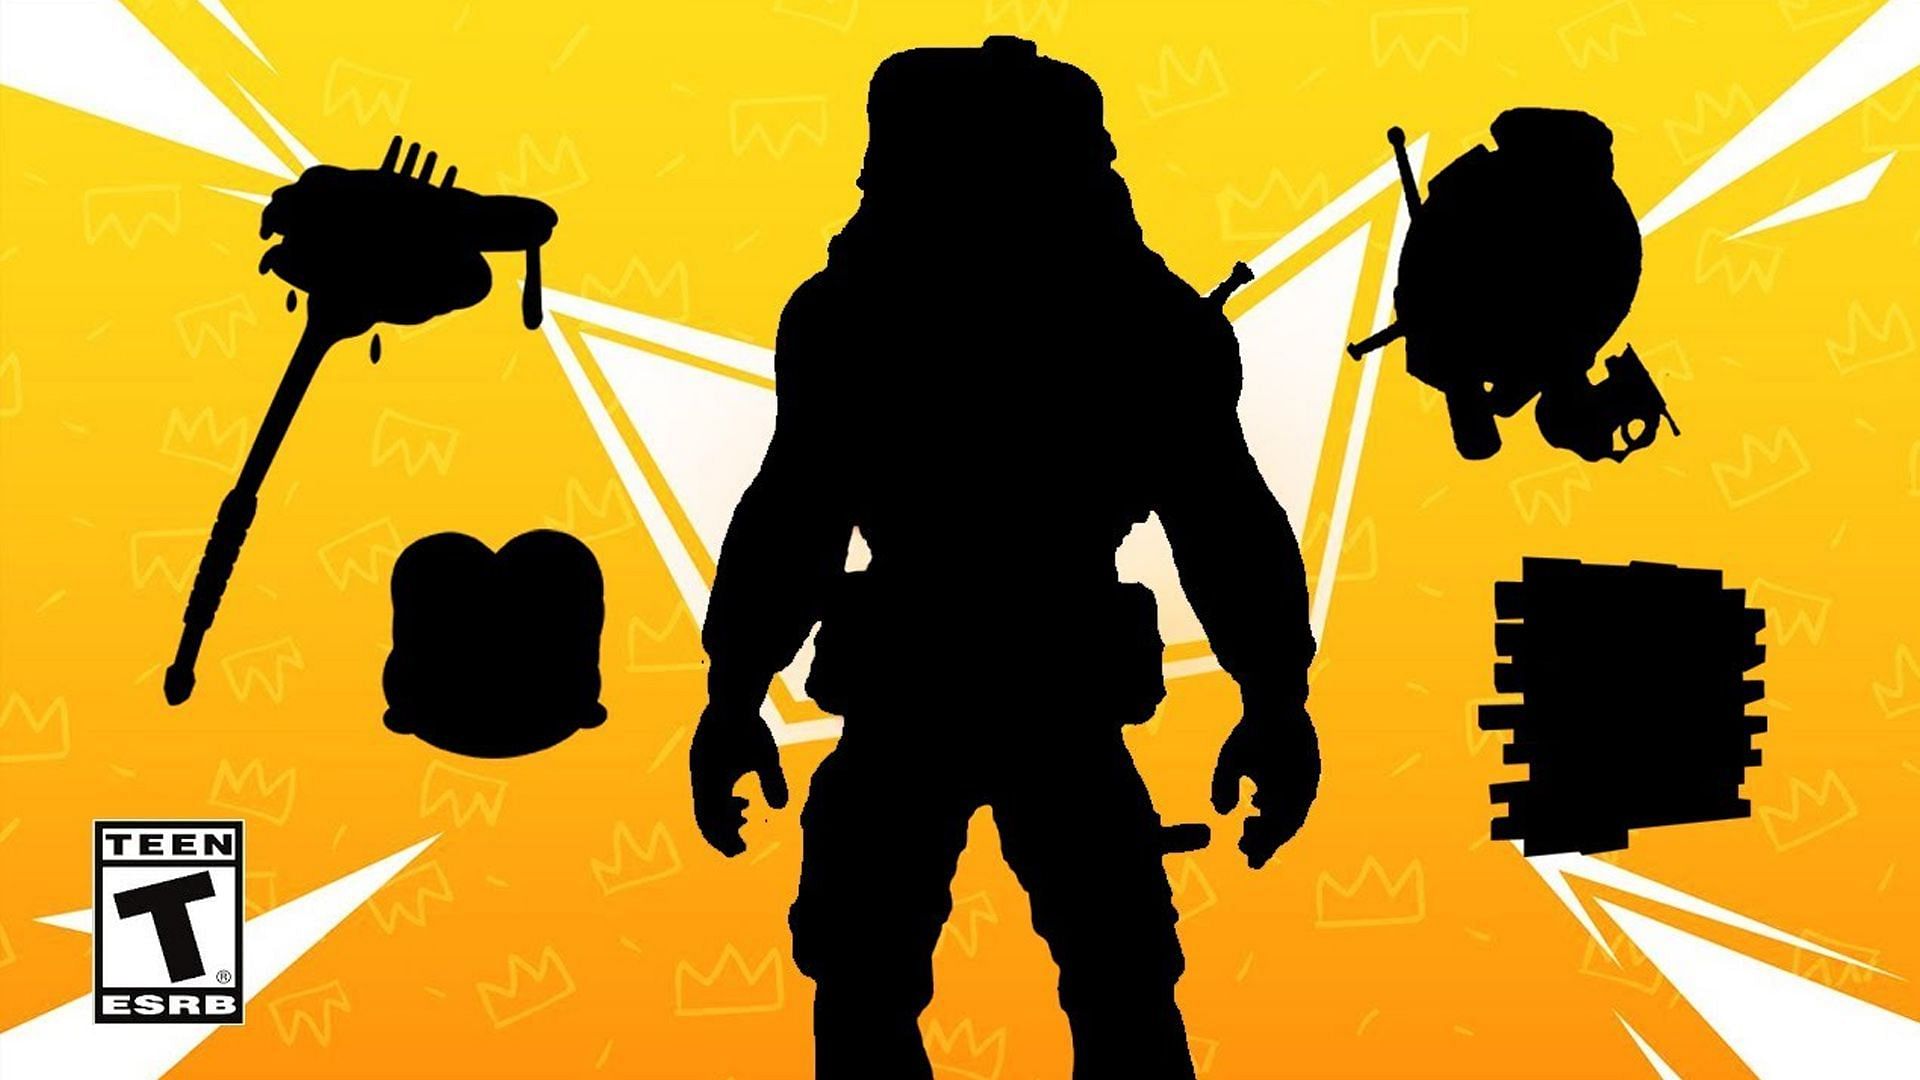 Fortnite x Fall Guys brings more free cosmetic items to the game (Image via FBRFeed)